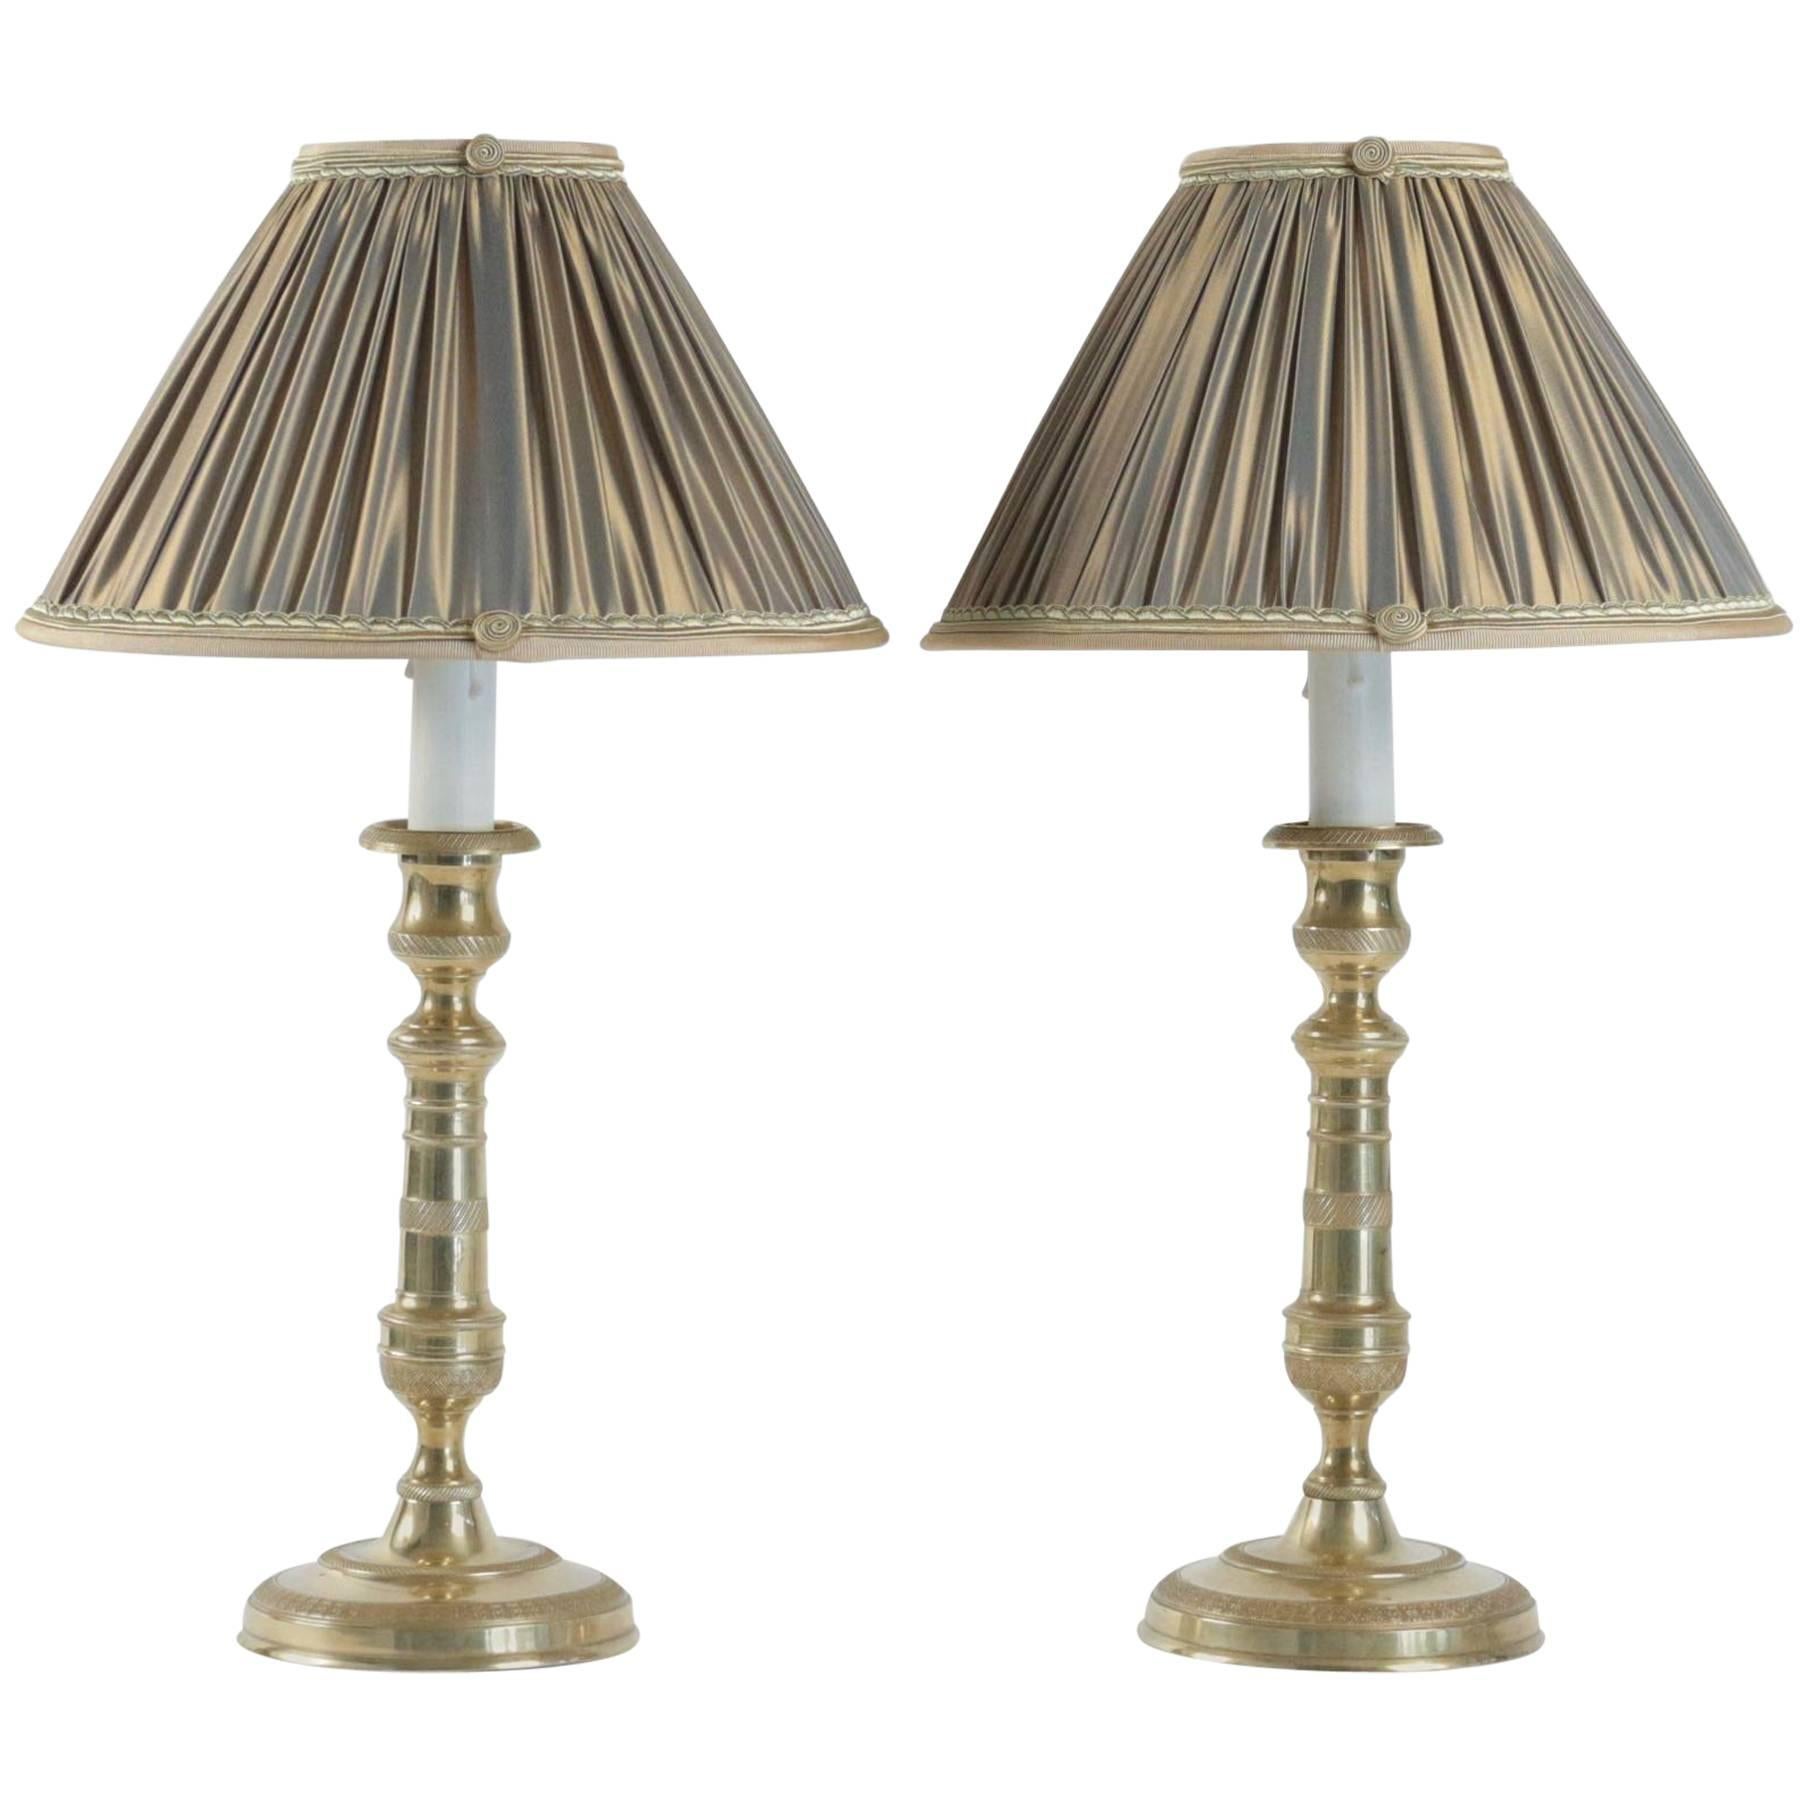 Pair of French, Louis XVI Period Gilt Bronze Candlestick Lamps, circa 1780